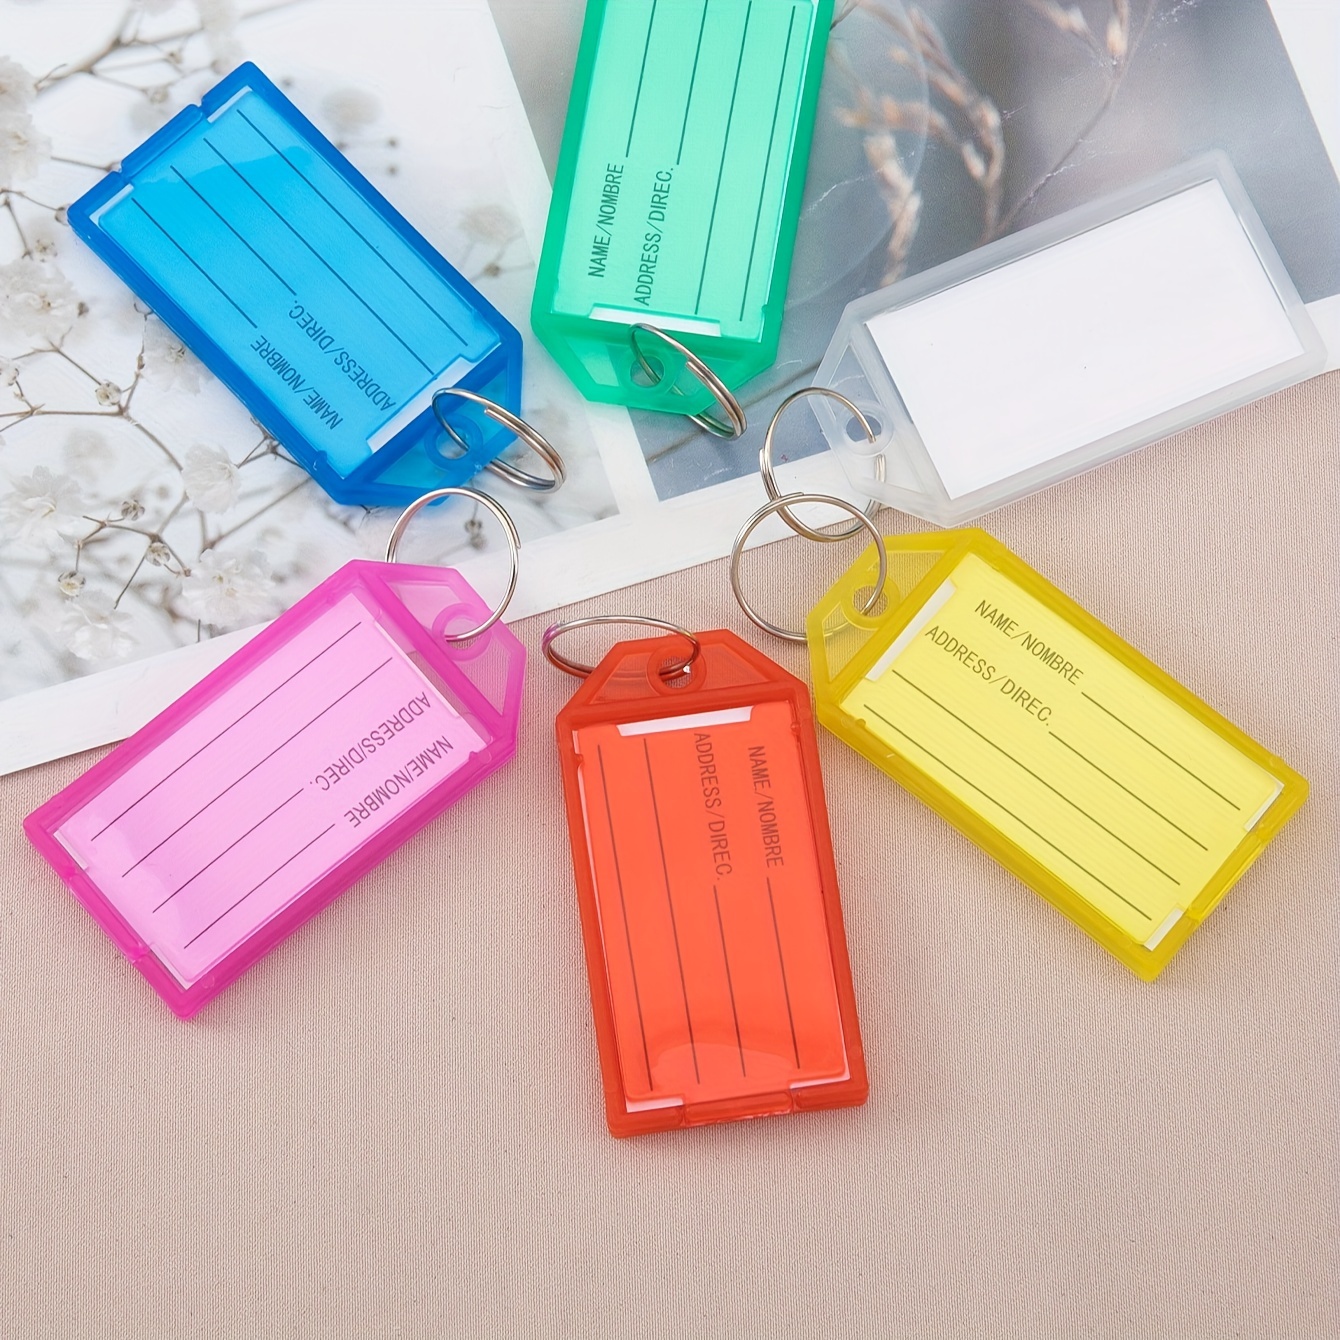  100Pcs Plastic Key Tags with Labels, Key Labels with Ring and  Label Window, Key Tags Identifiers for Name, Luggage 10 Colors (100 Pcs) :  Office Products